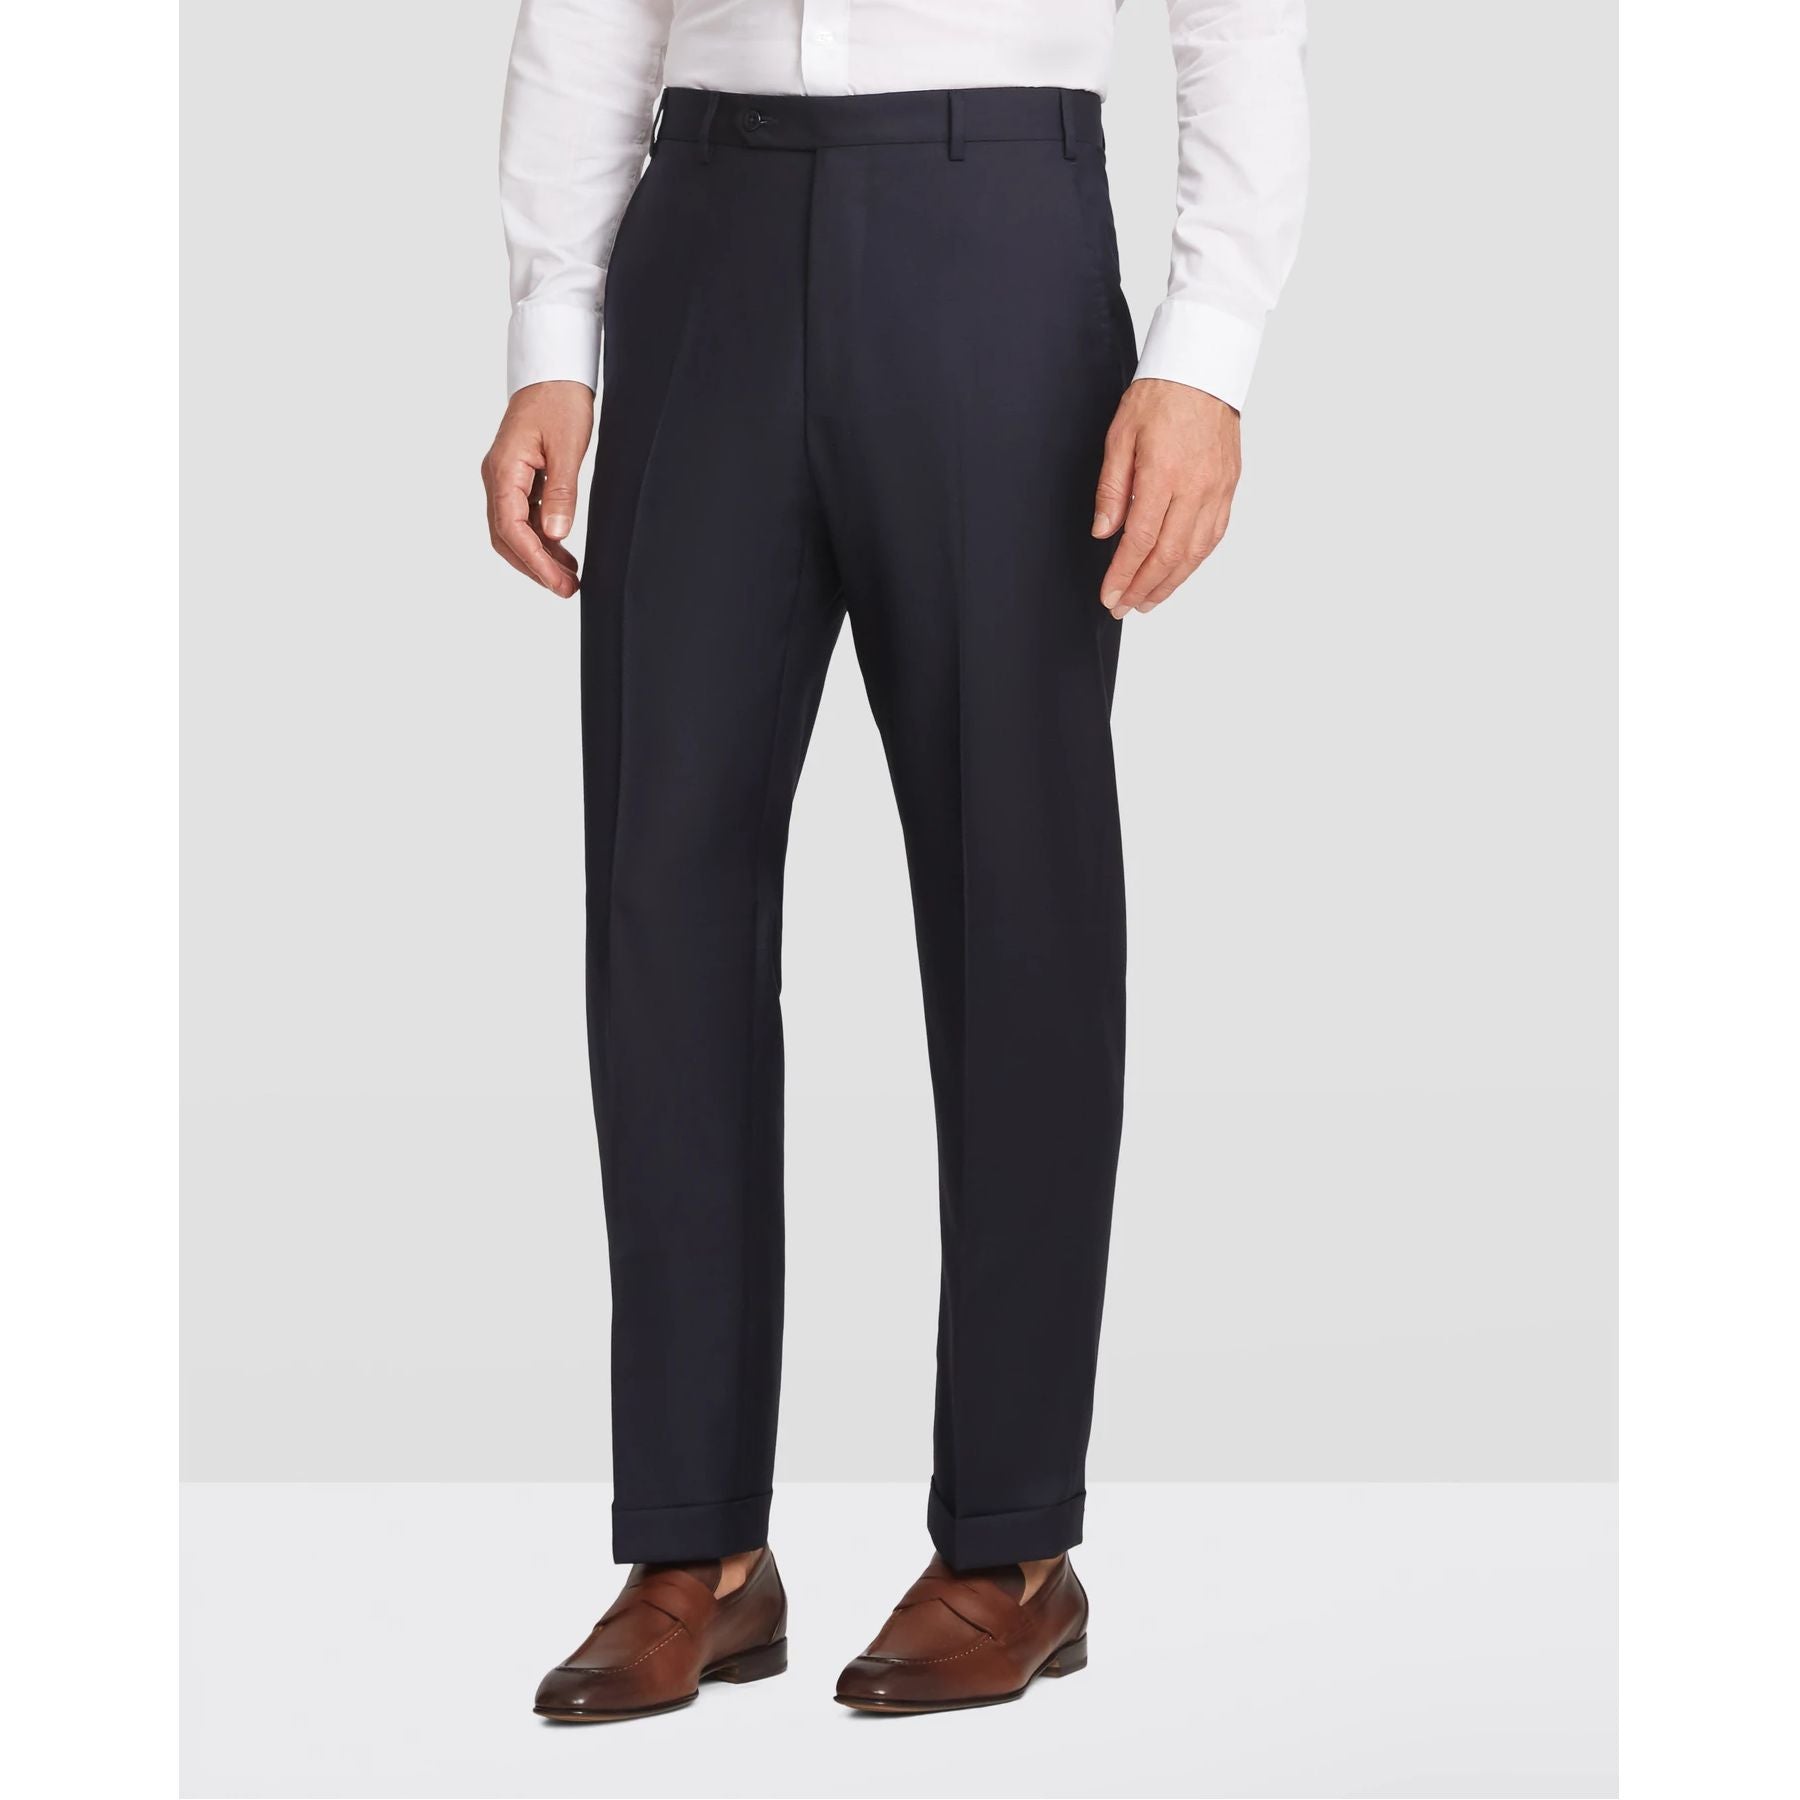 Parker Flat Front Stretch Wool Trouser in Navy (Modern Straight Fit) by Zanella